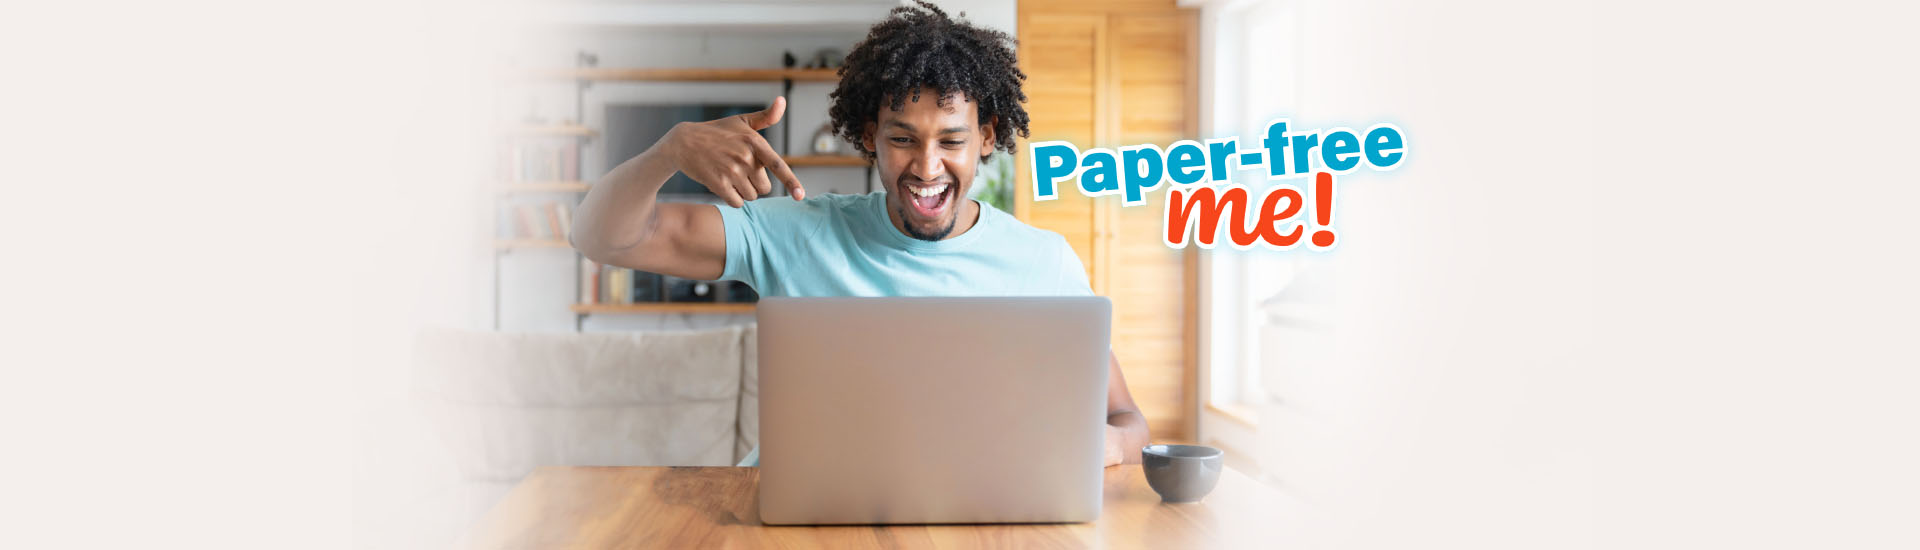 excited person signing up for paper free on laptop